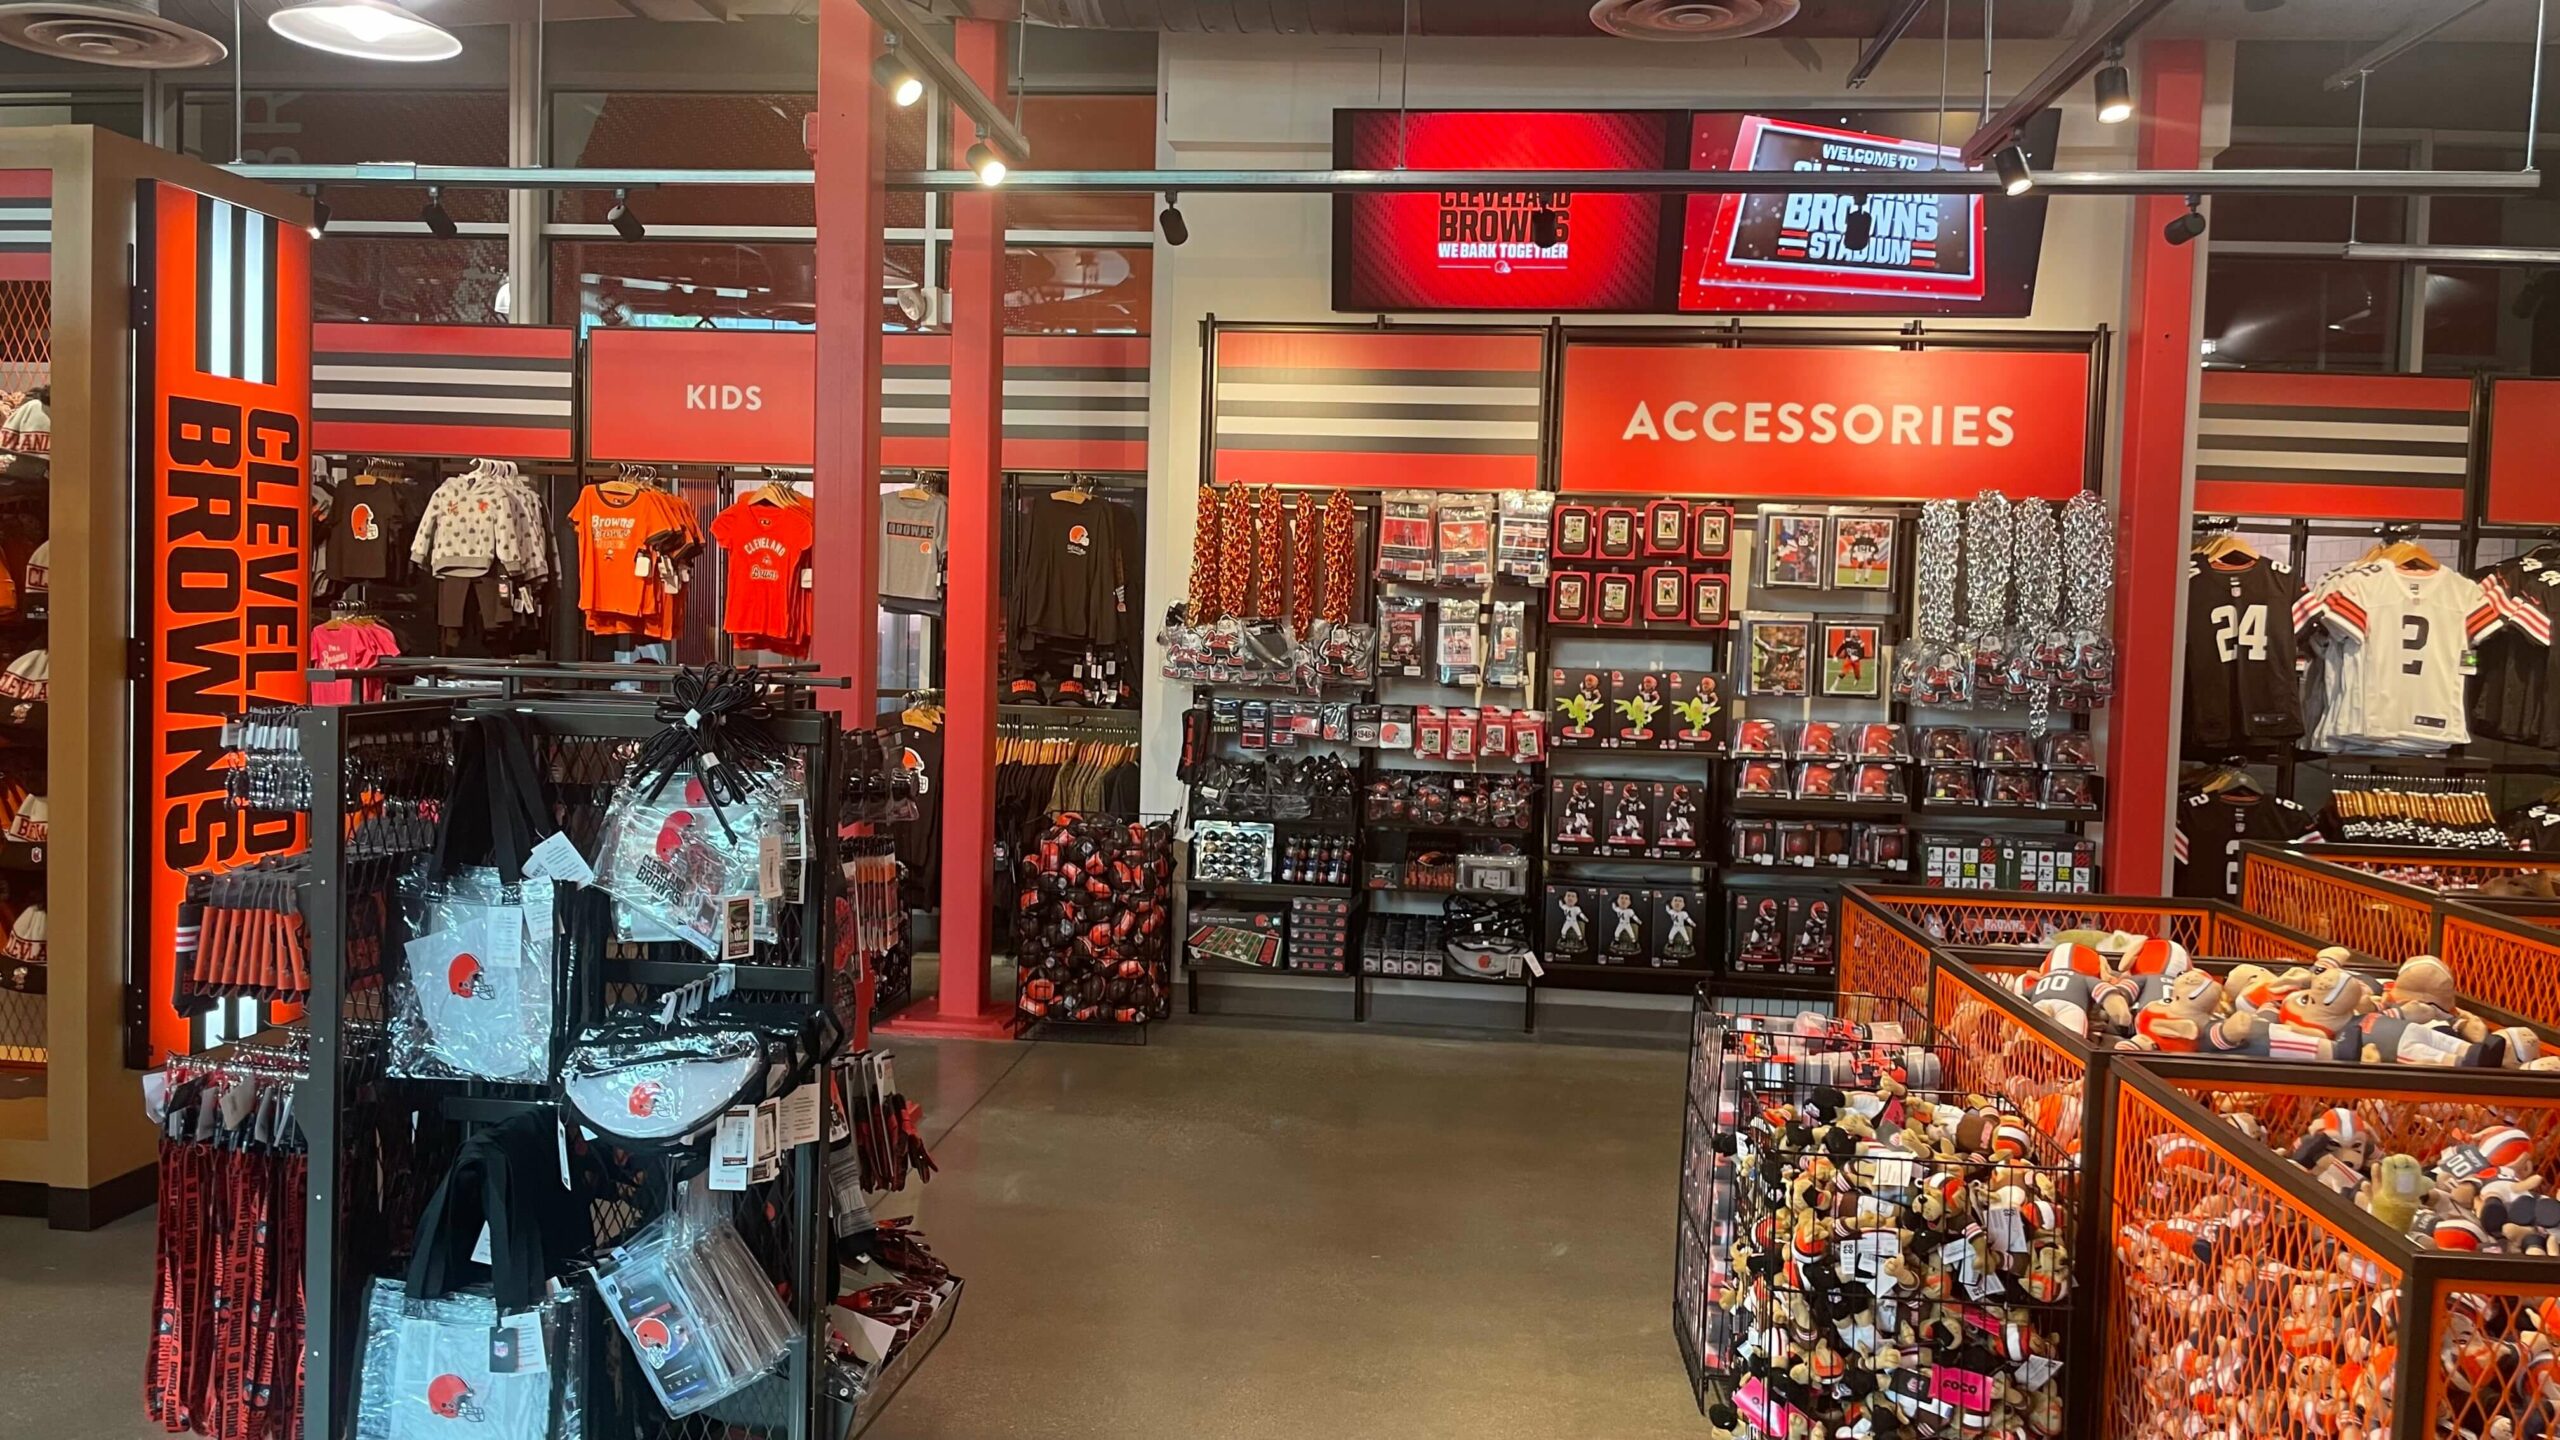 cleveland browns shopping